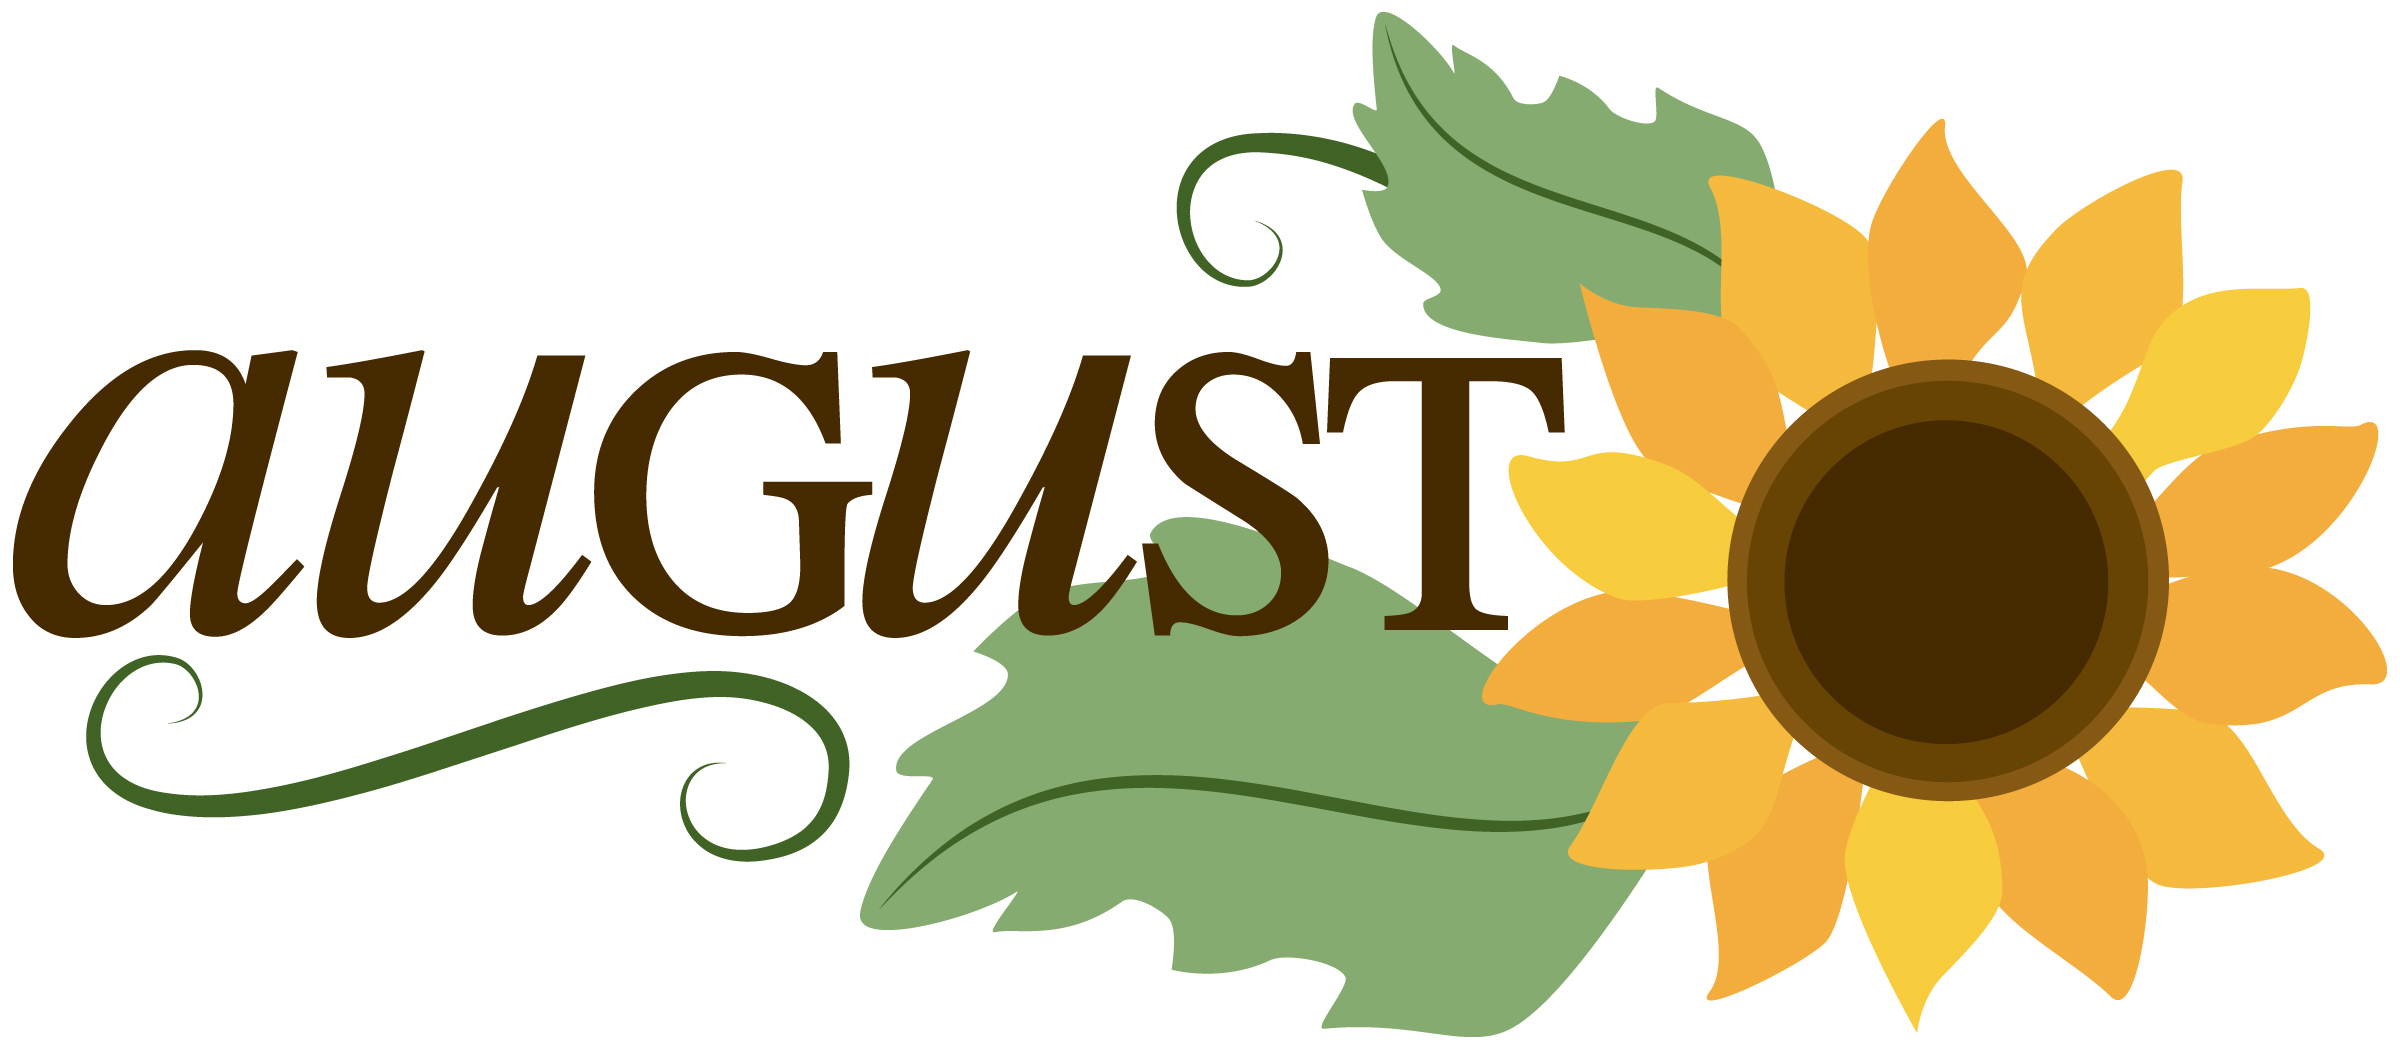 august-clipart-august-transparent-free-for-download-on-webstockreview-2023